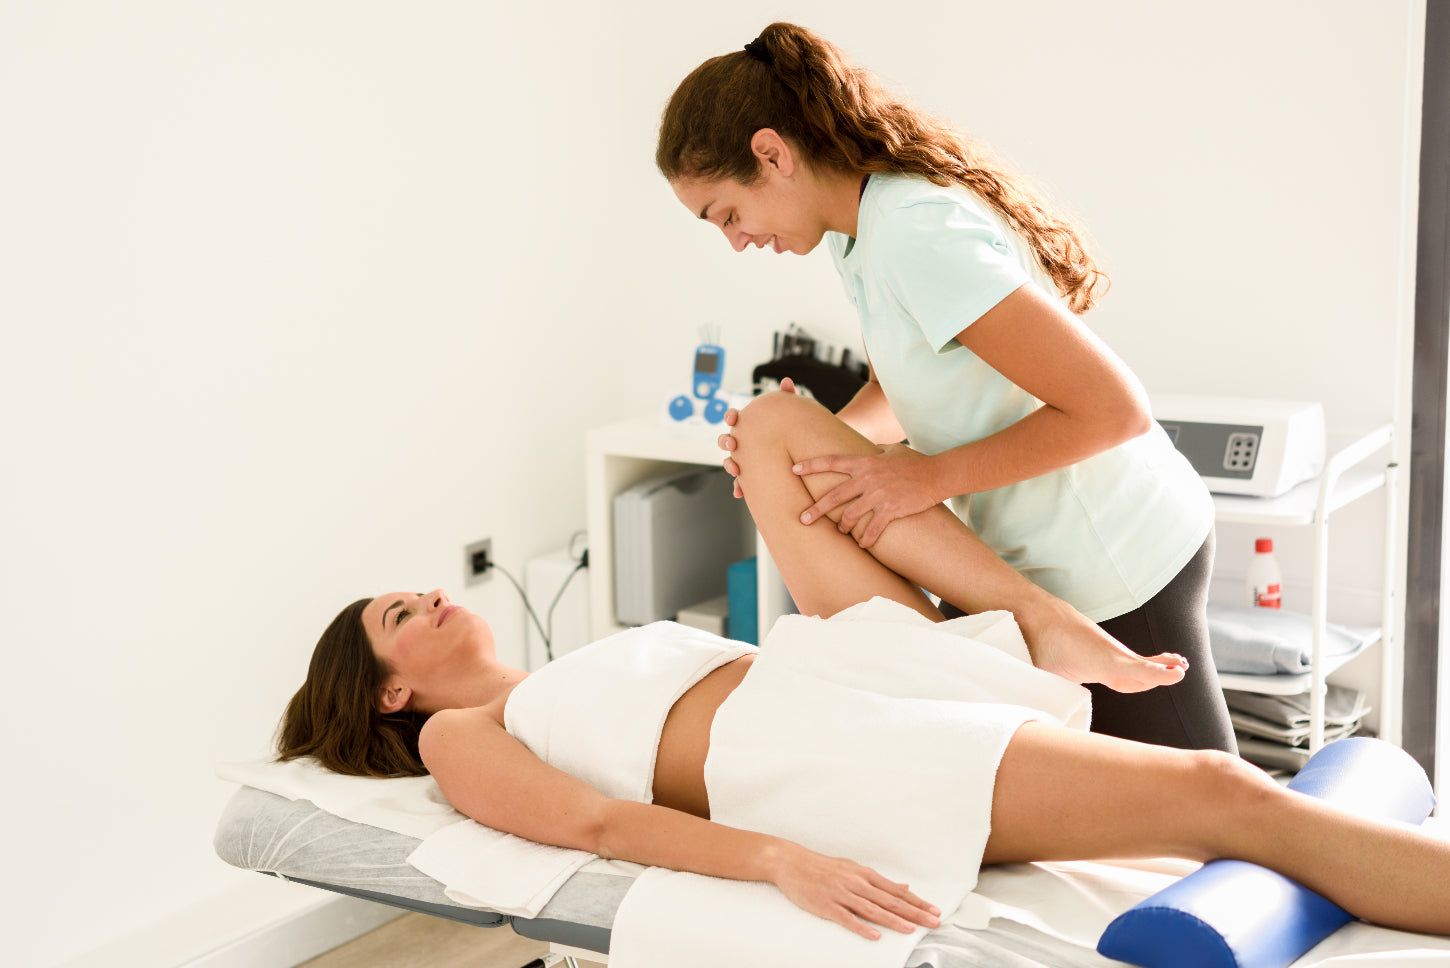 therapist using massage and physical therapy techniques on female client